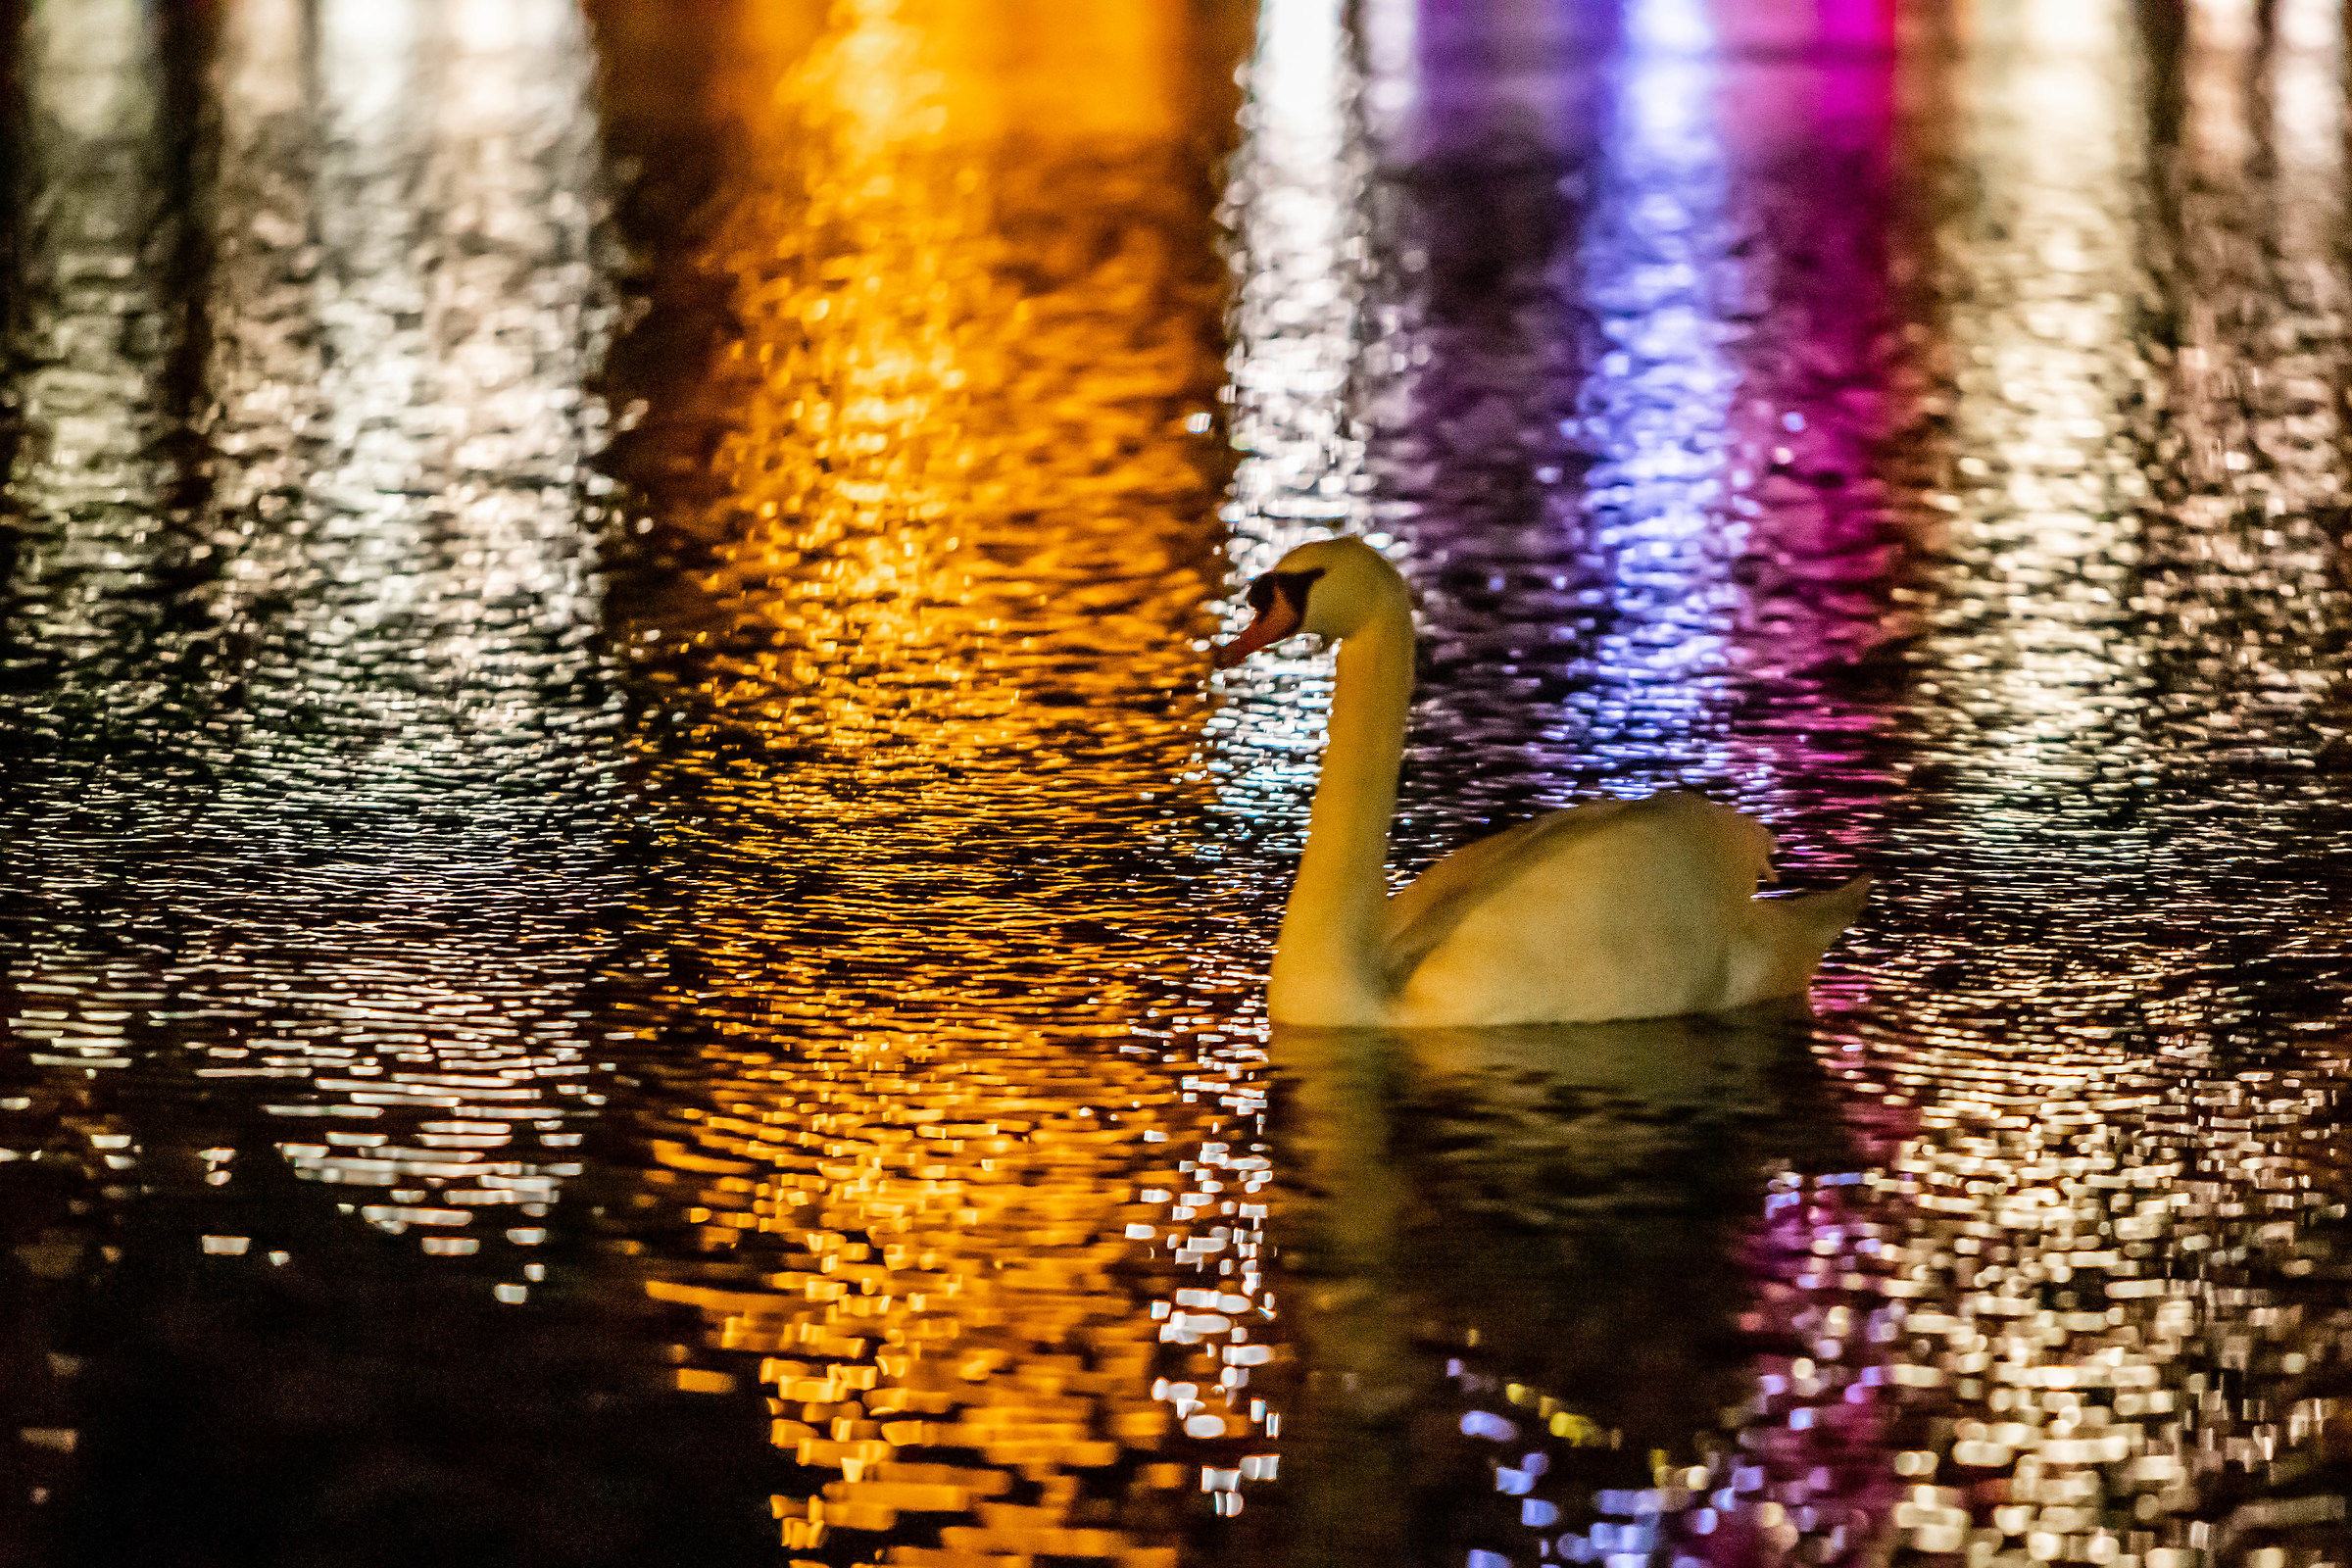 Nocturne: The Swan....